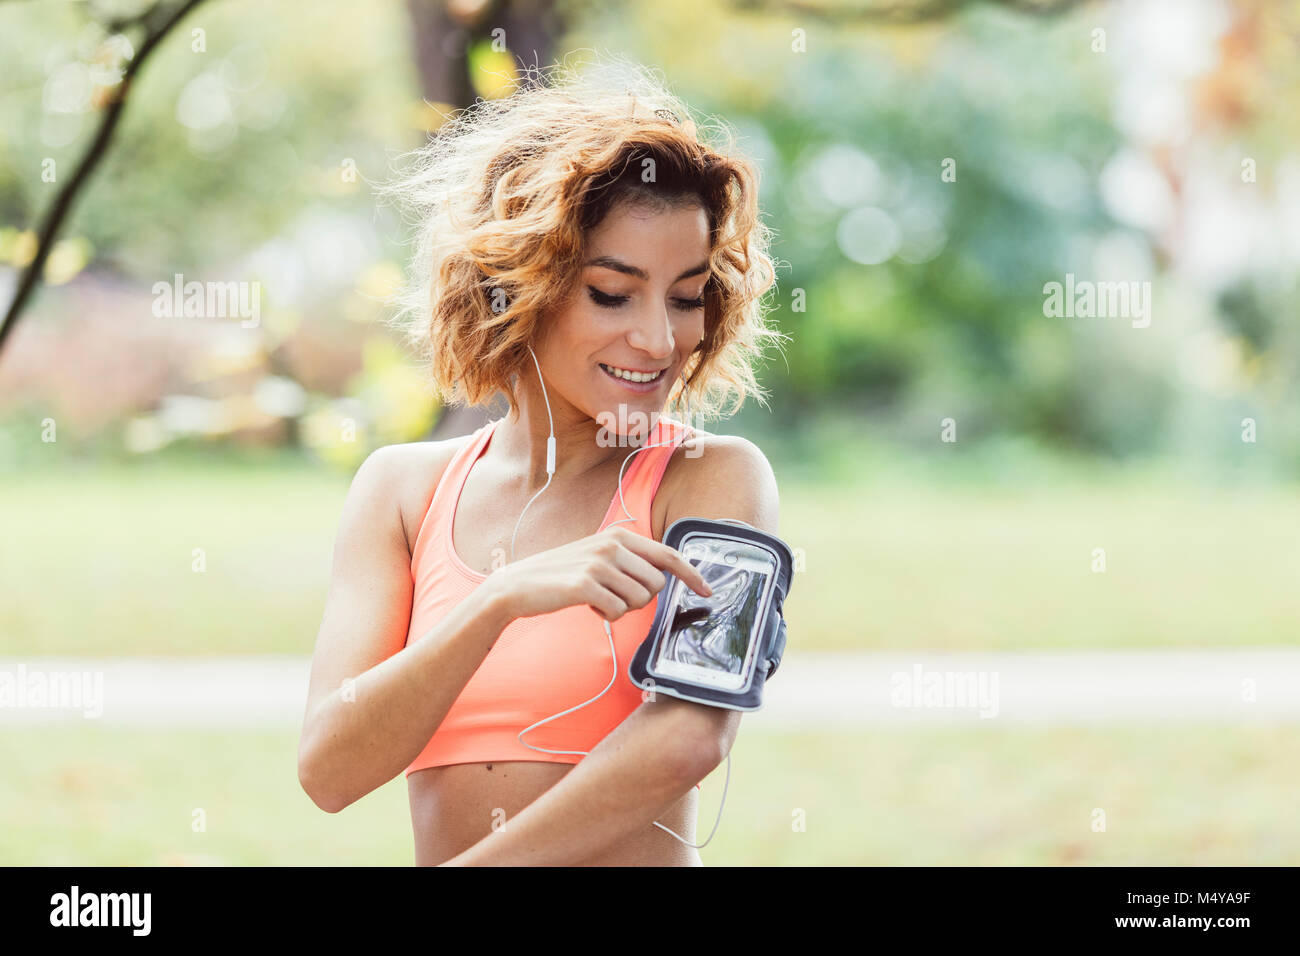 Runner athlete listening to music in headphones from smart phone mp3 player Stock Photo